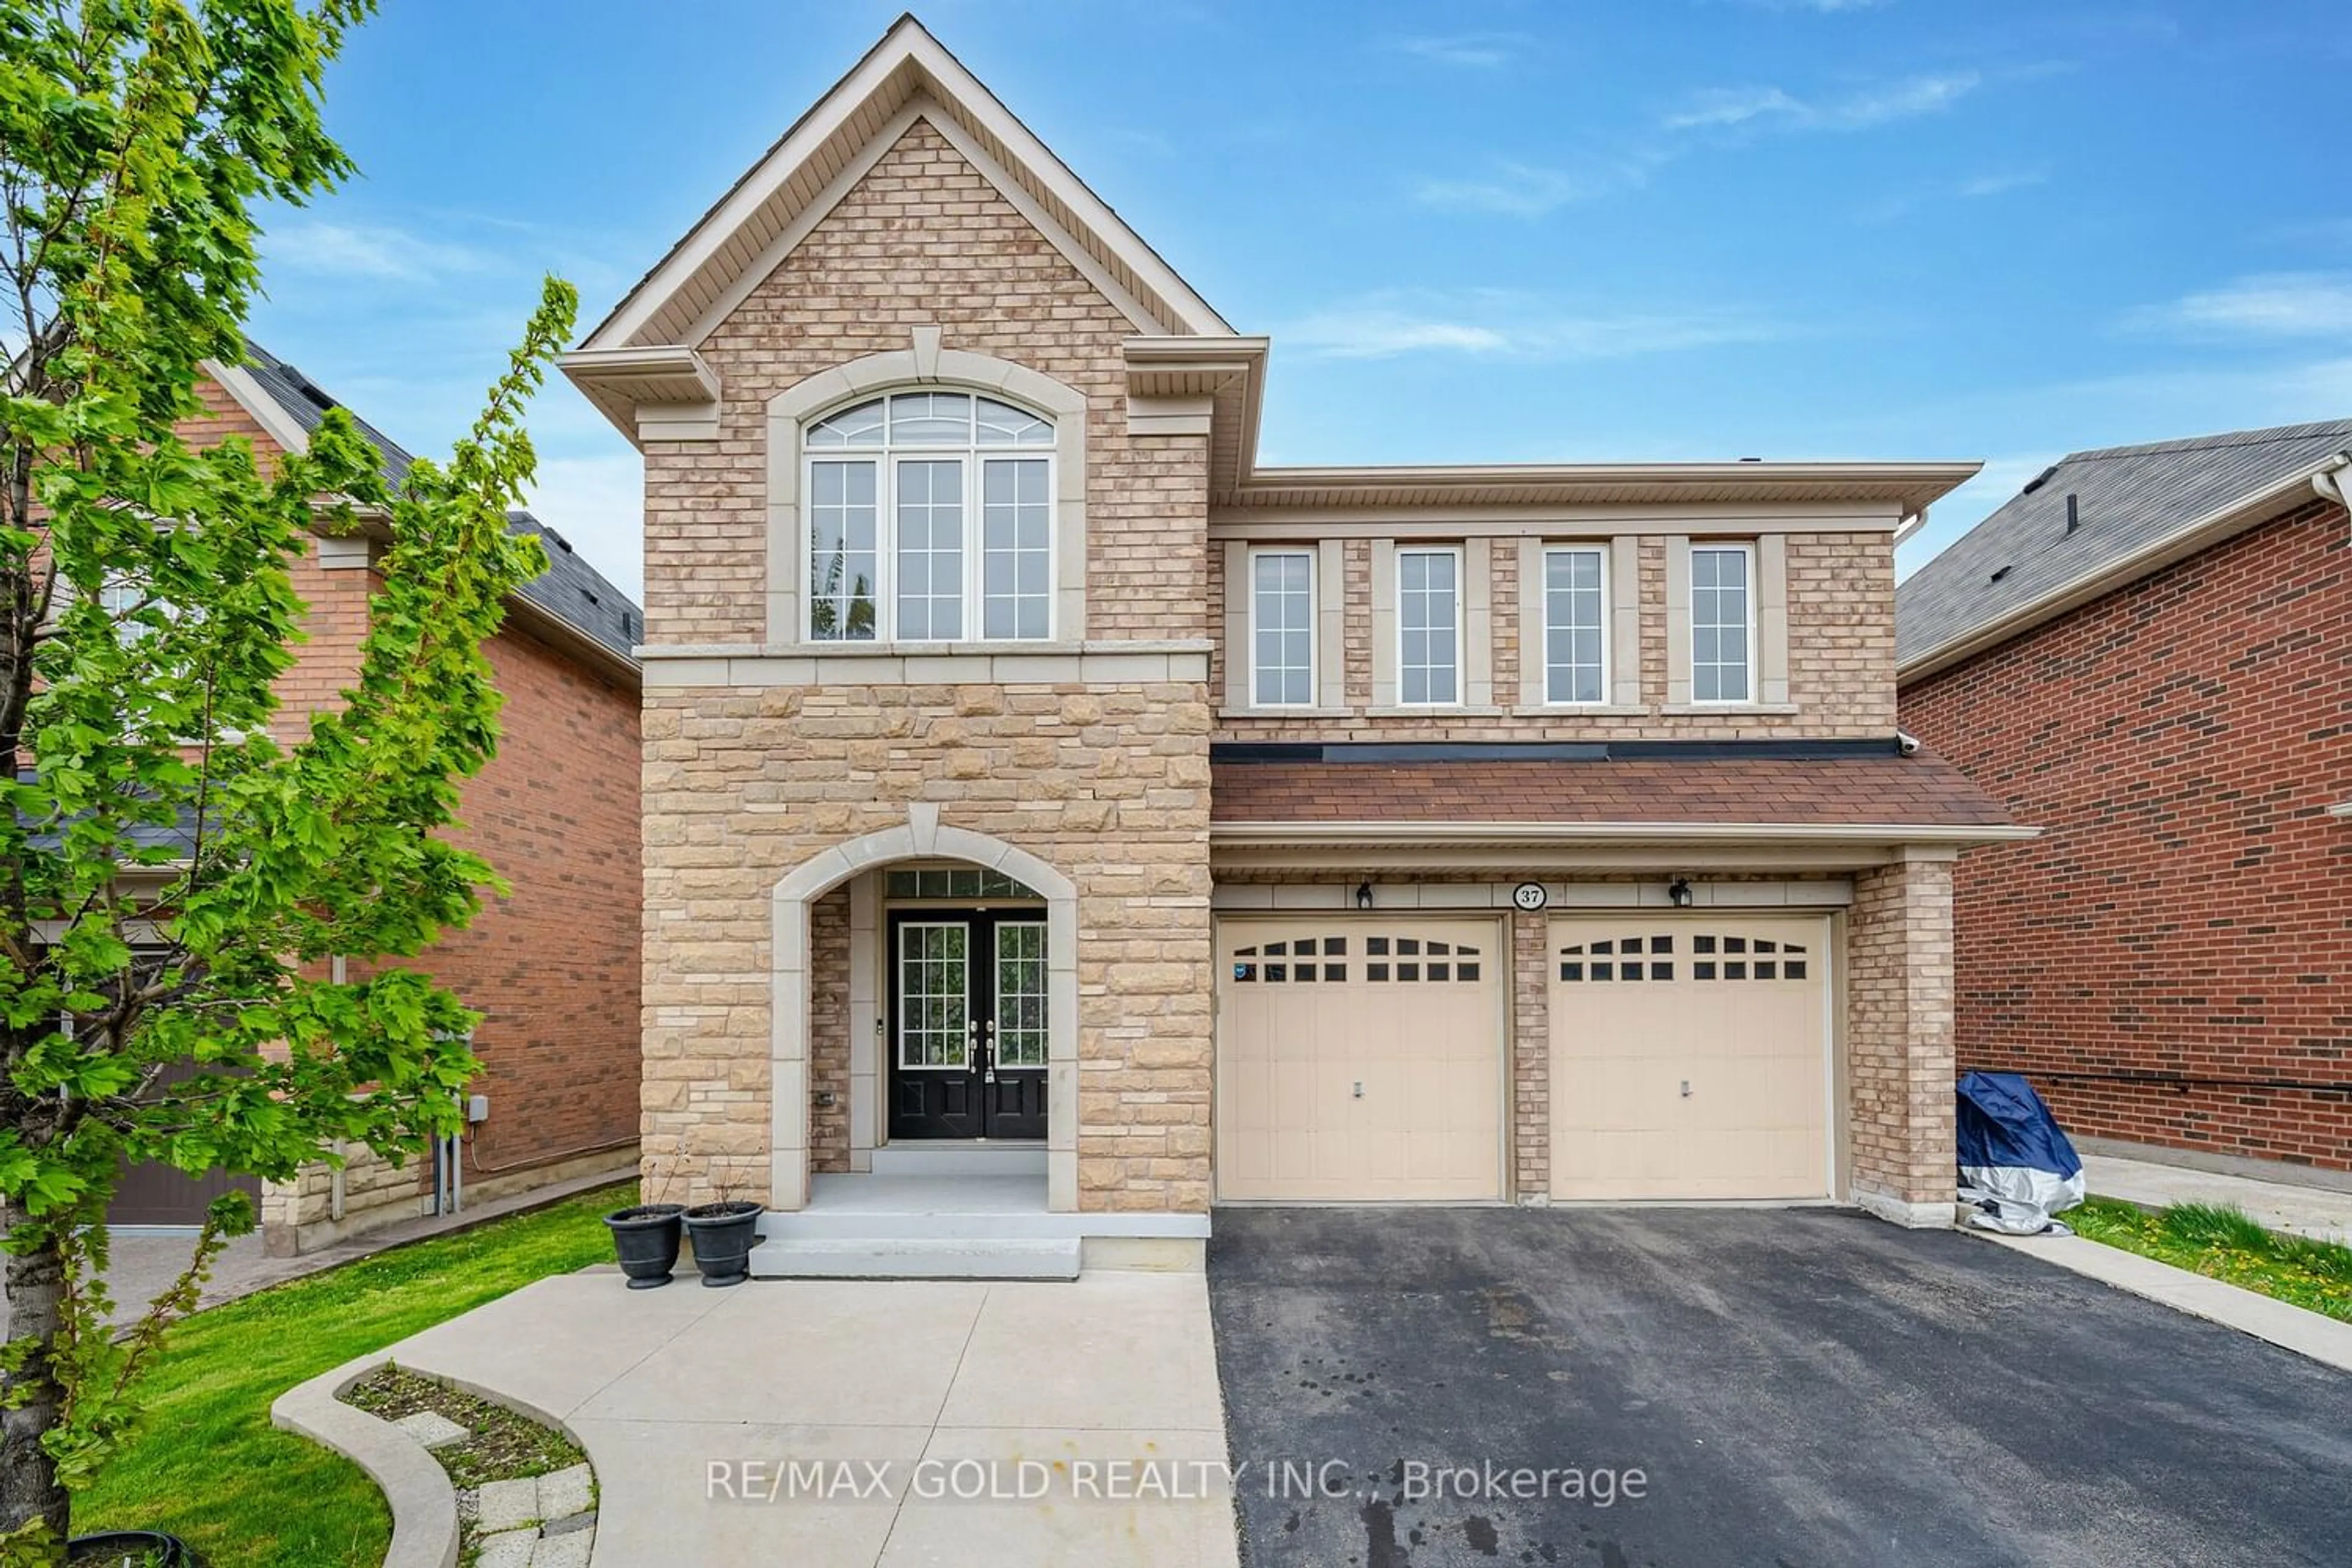 Home with brick exterior material for 37 Ross Dr, Brampton Ontario L6R 0W2